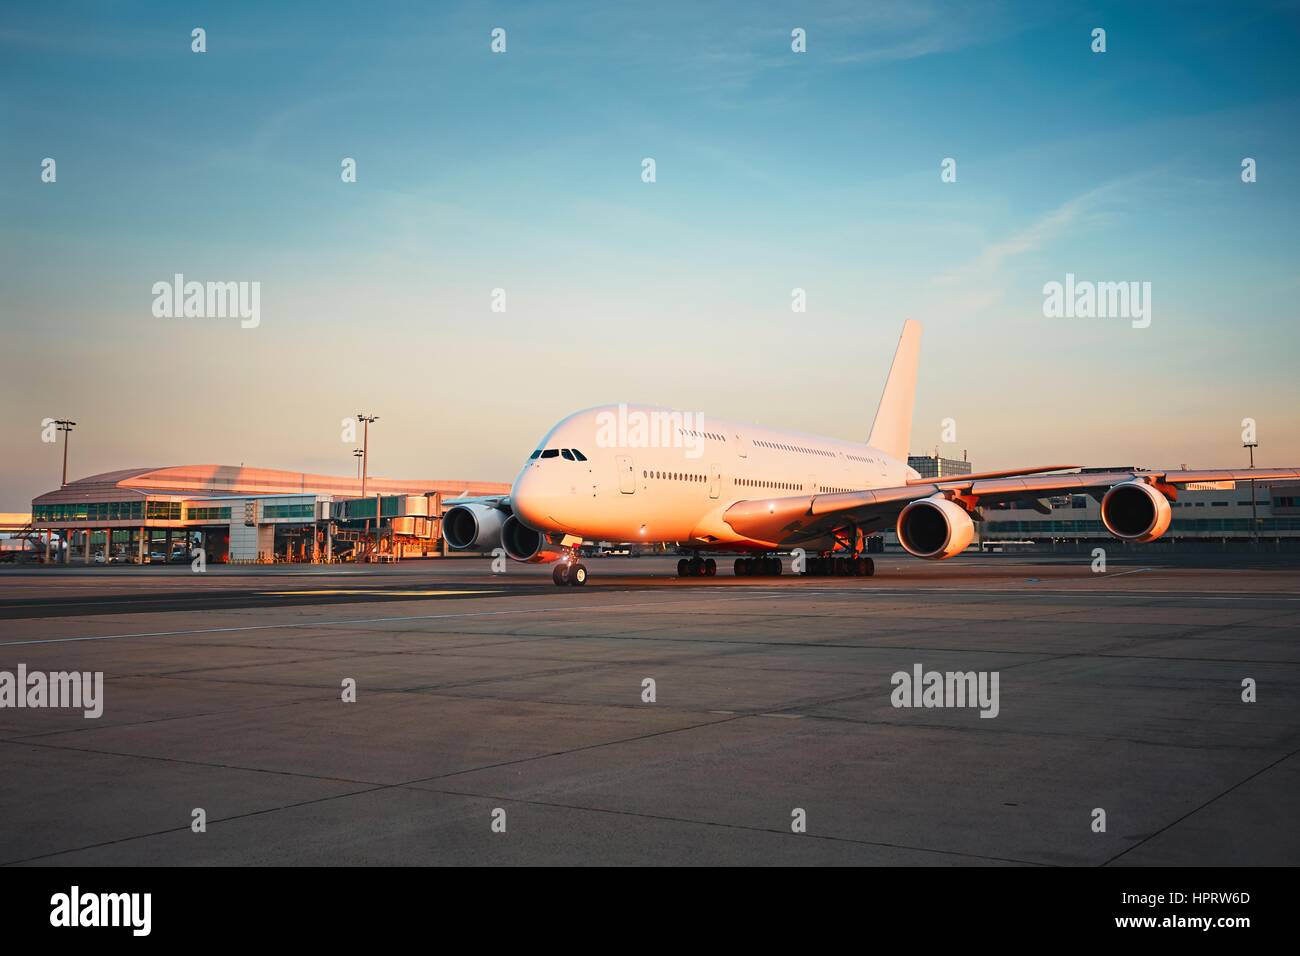 Traffic of the airport at the sunset. Huge airplane is taxiing to the runway. Stock Photo